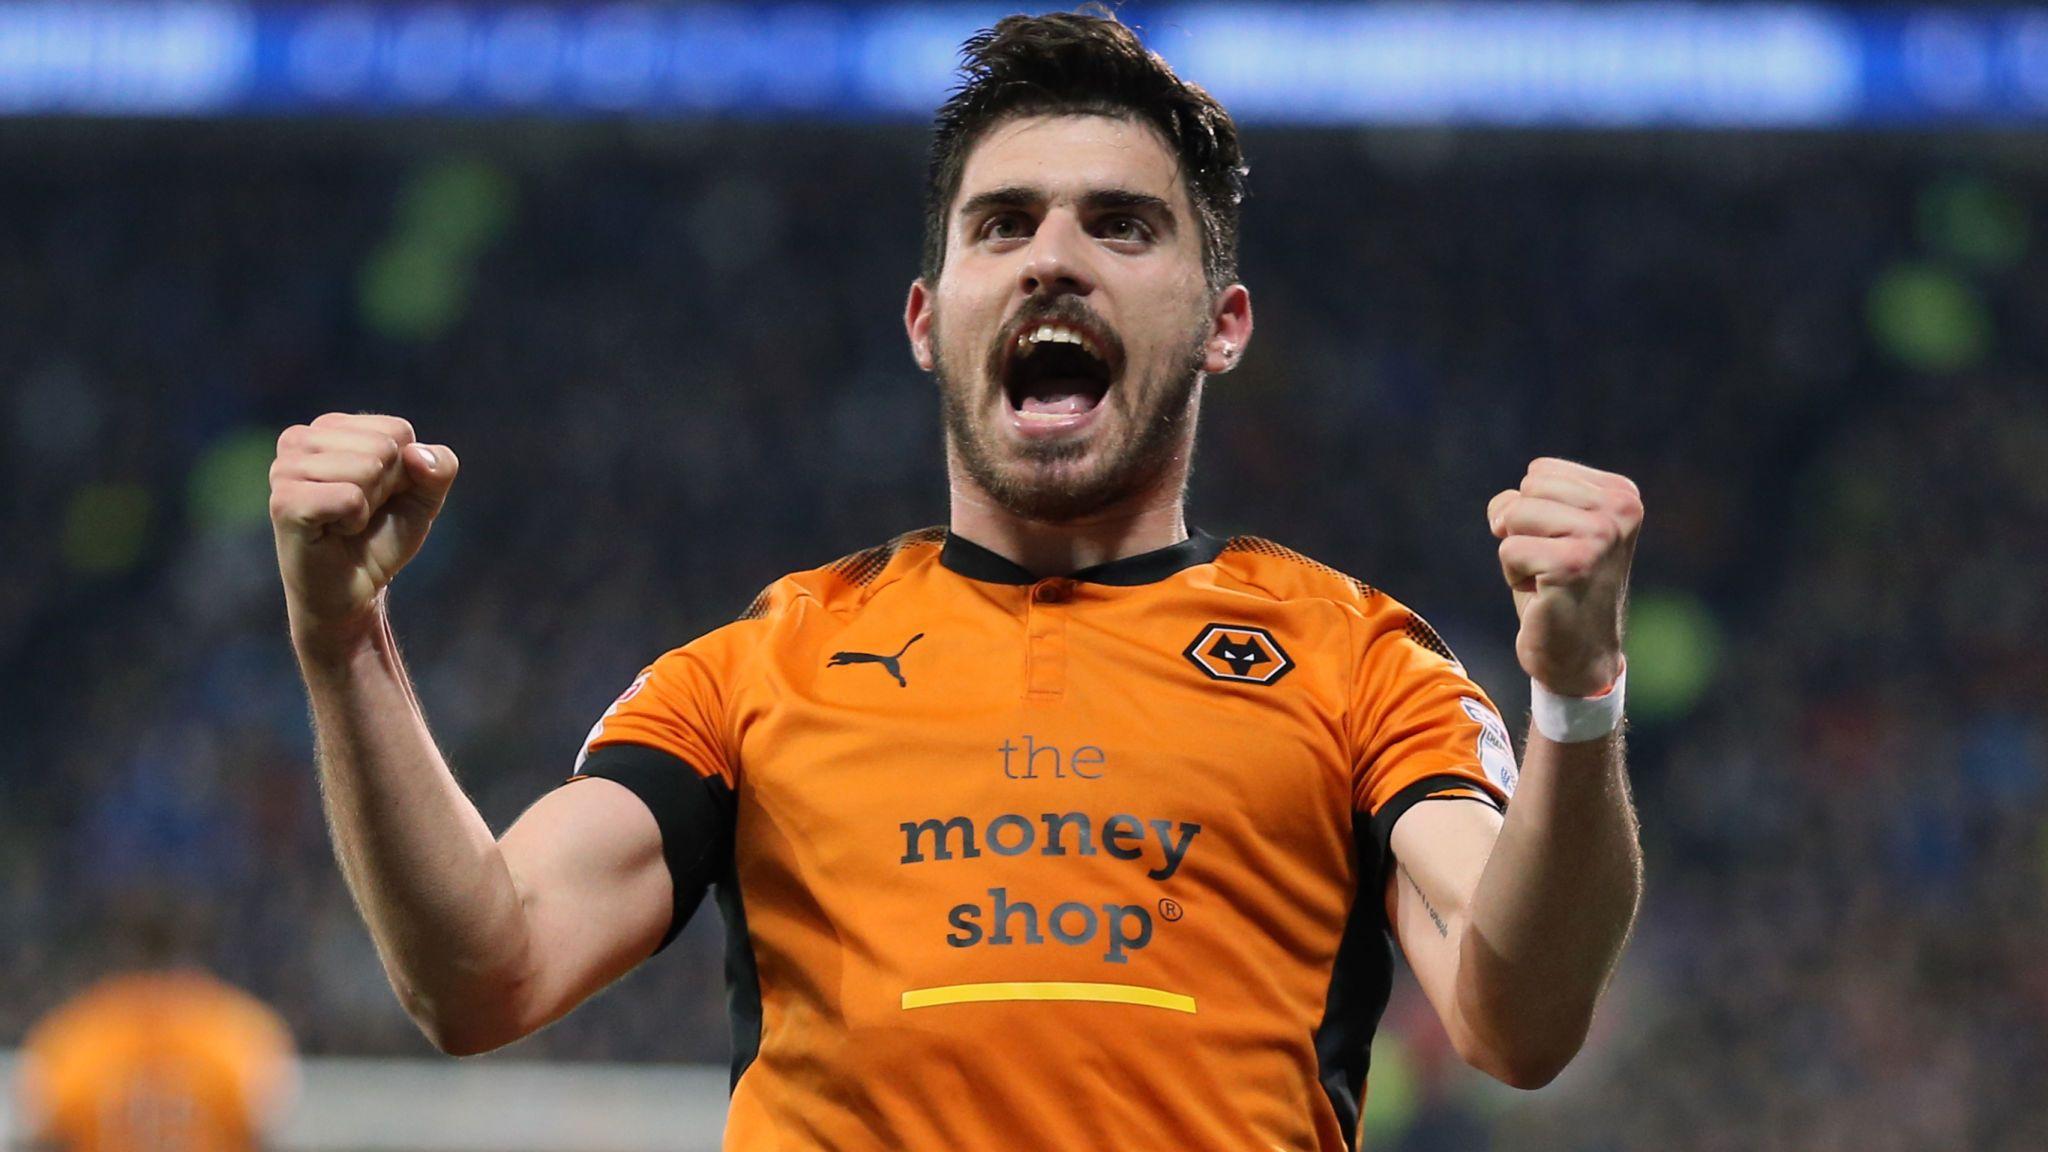 WATCH: Ruben Neves' six stunning strikes for Wolves this season